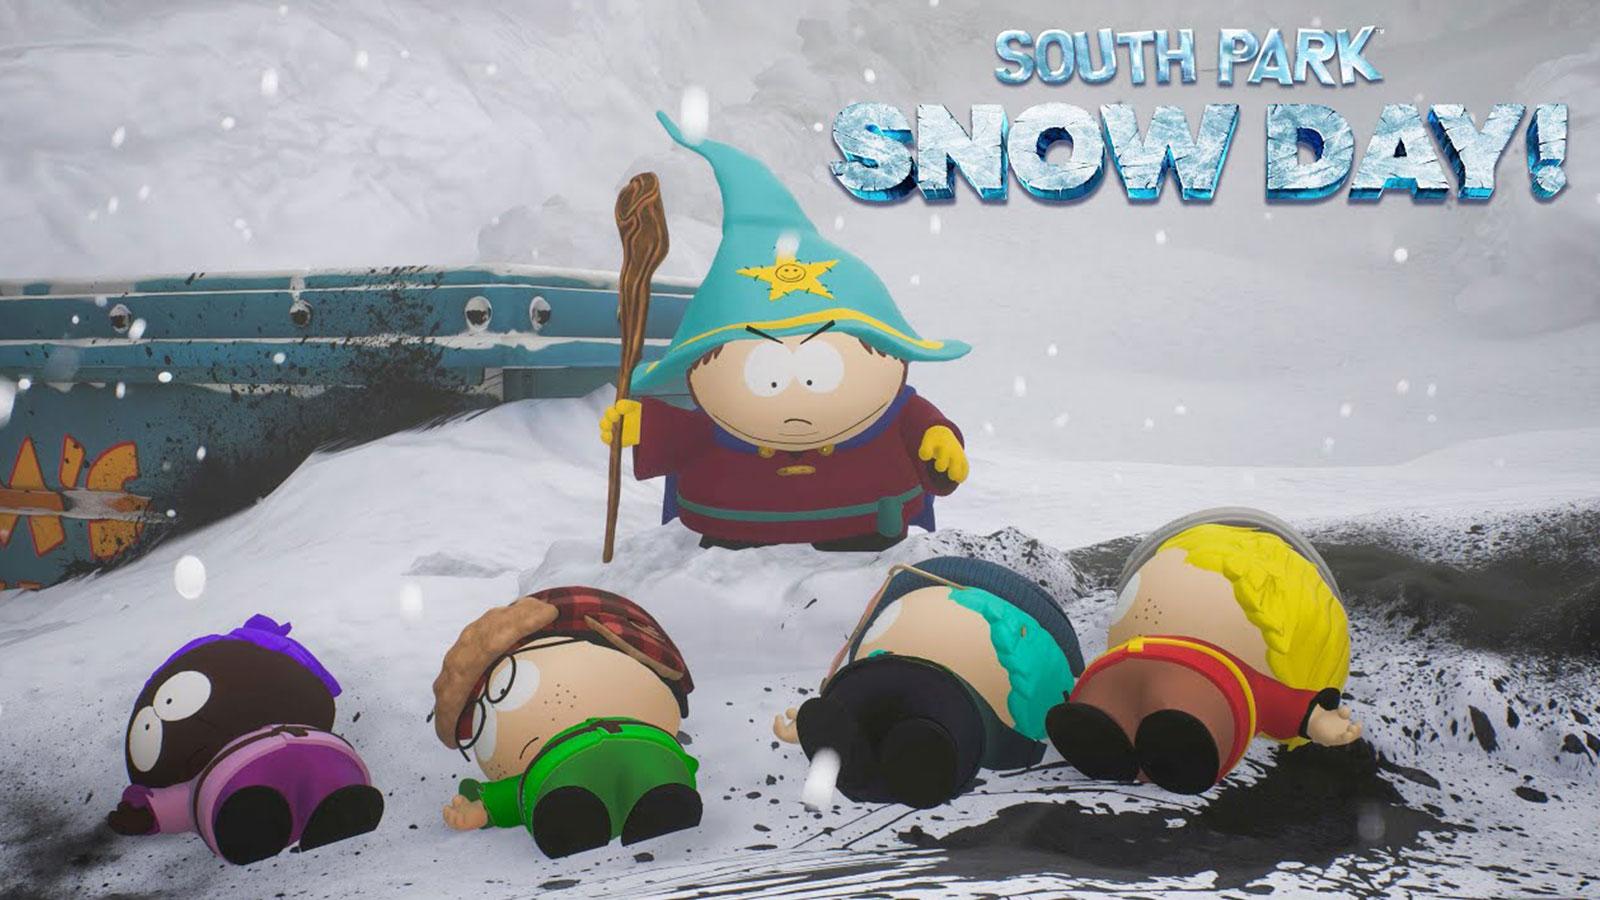 South Park: Snow Day personnages